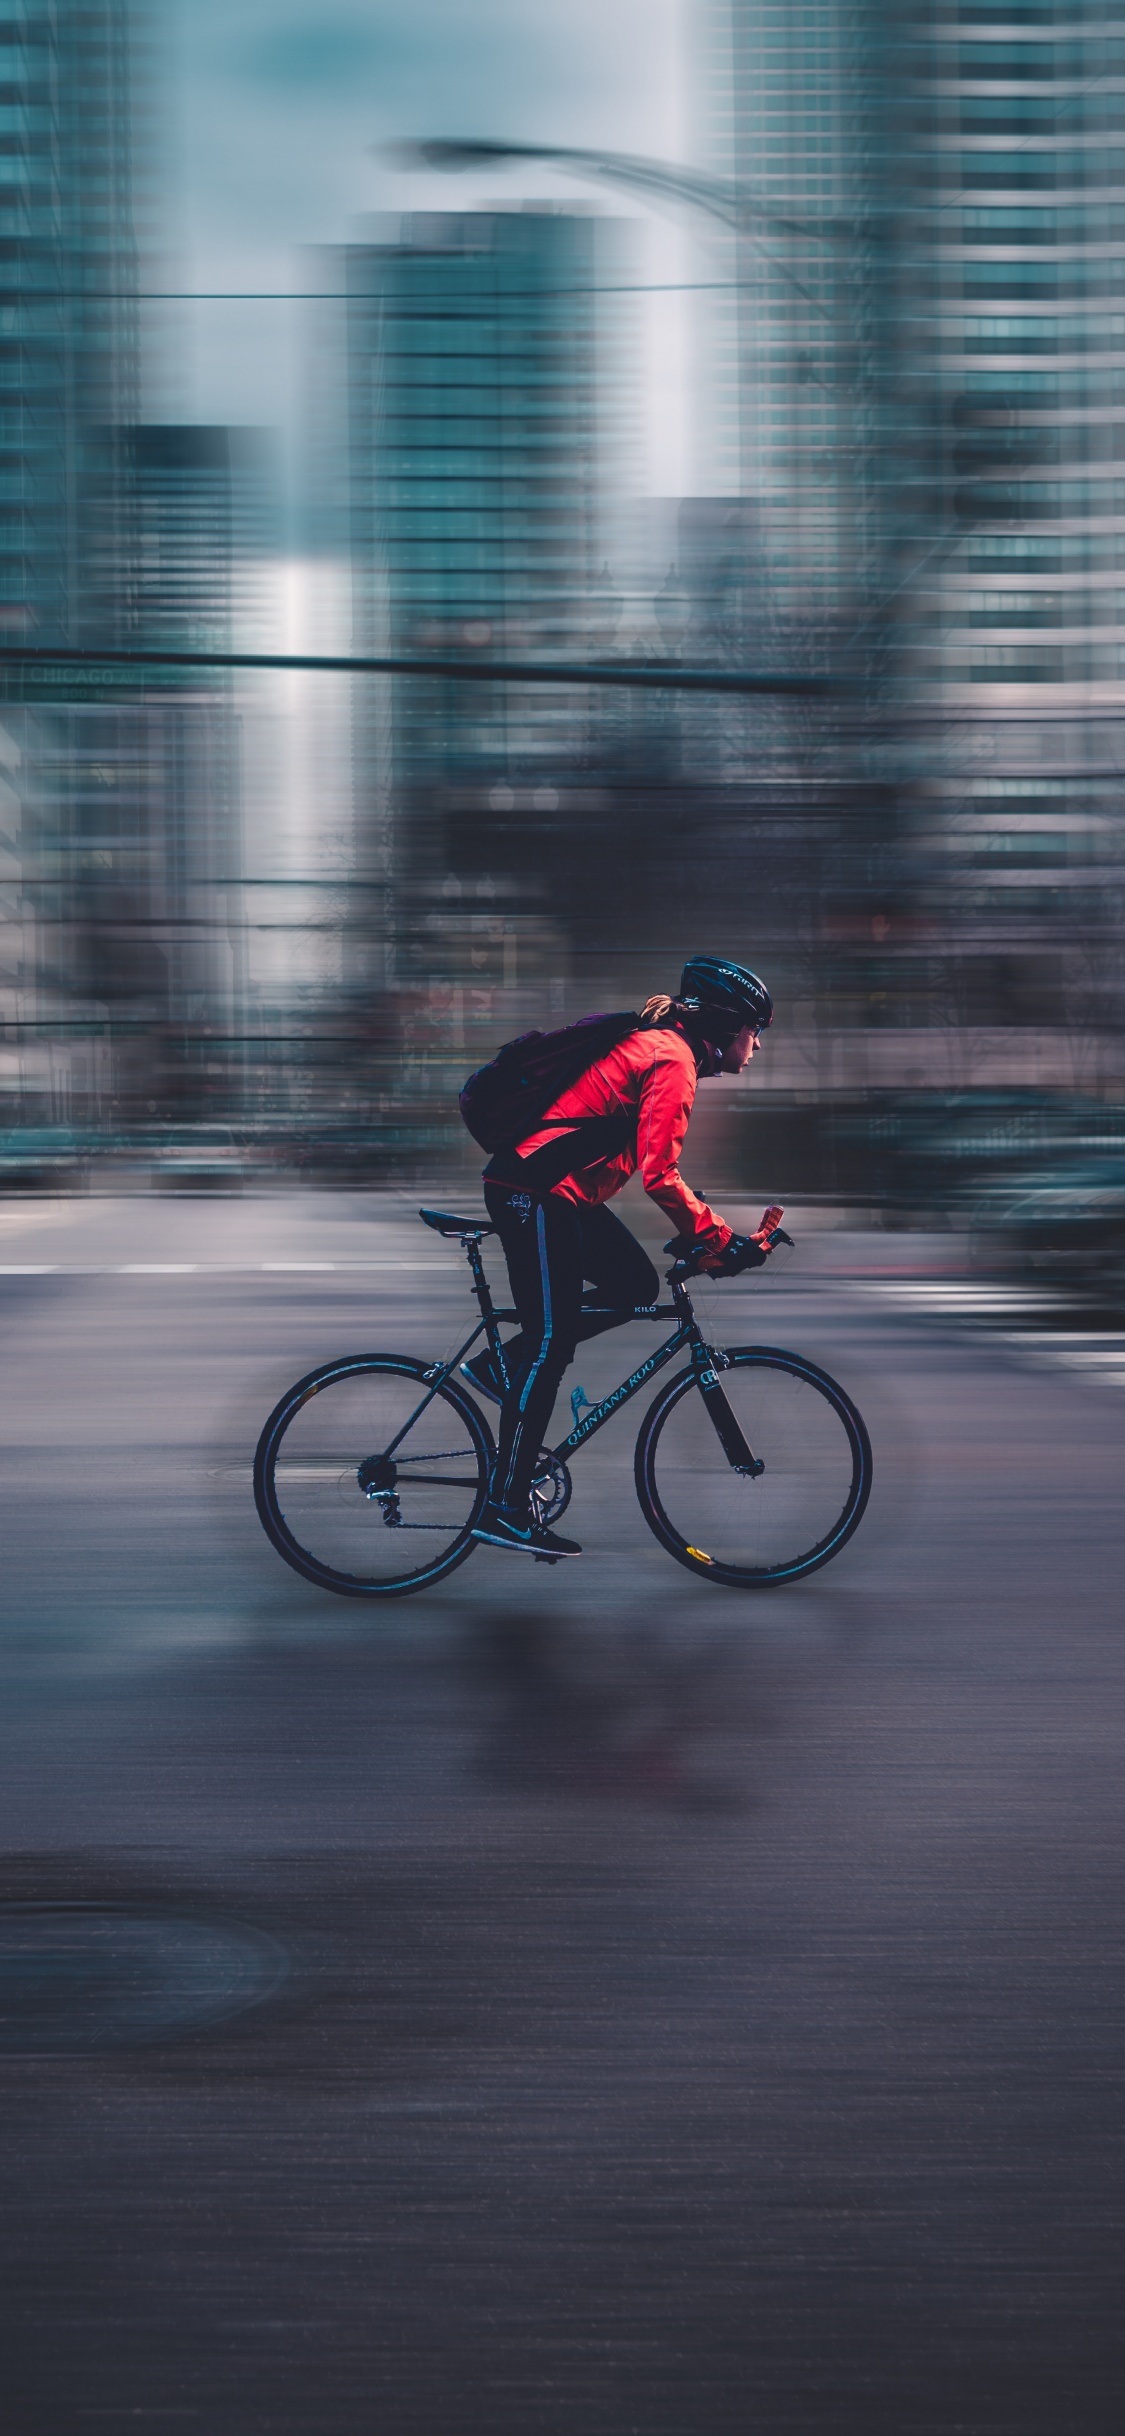 Man in Red Jacket Riding Bicycle on Road During Daytime. Wallpaper in 1125x2436 Resolution